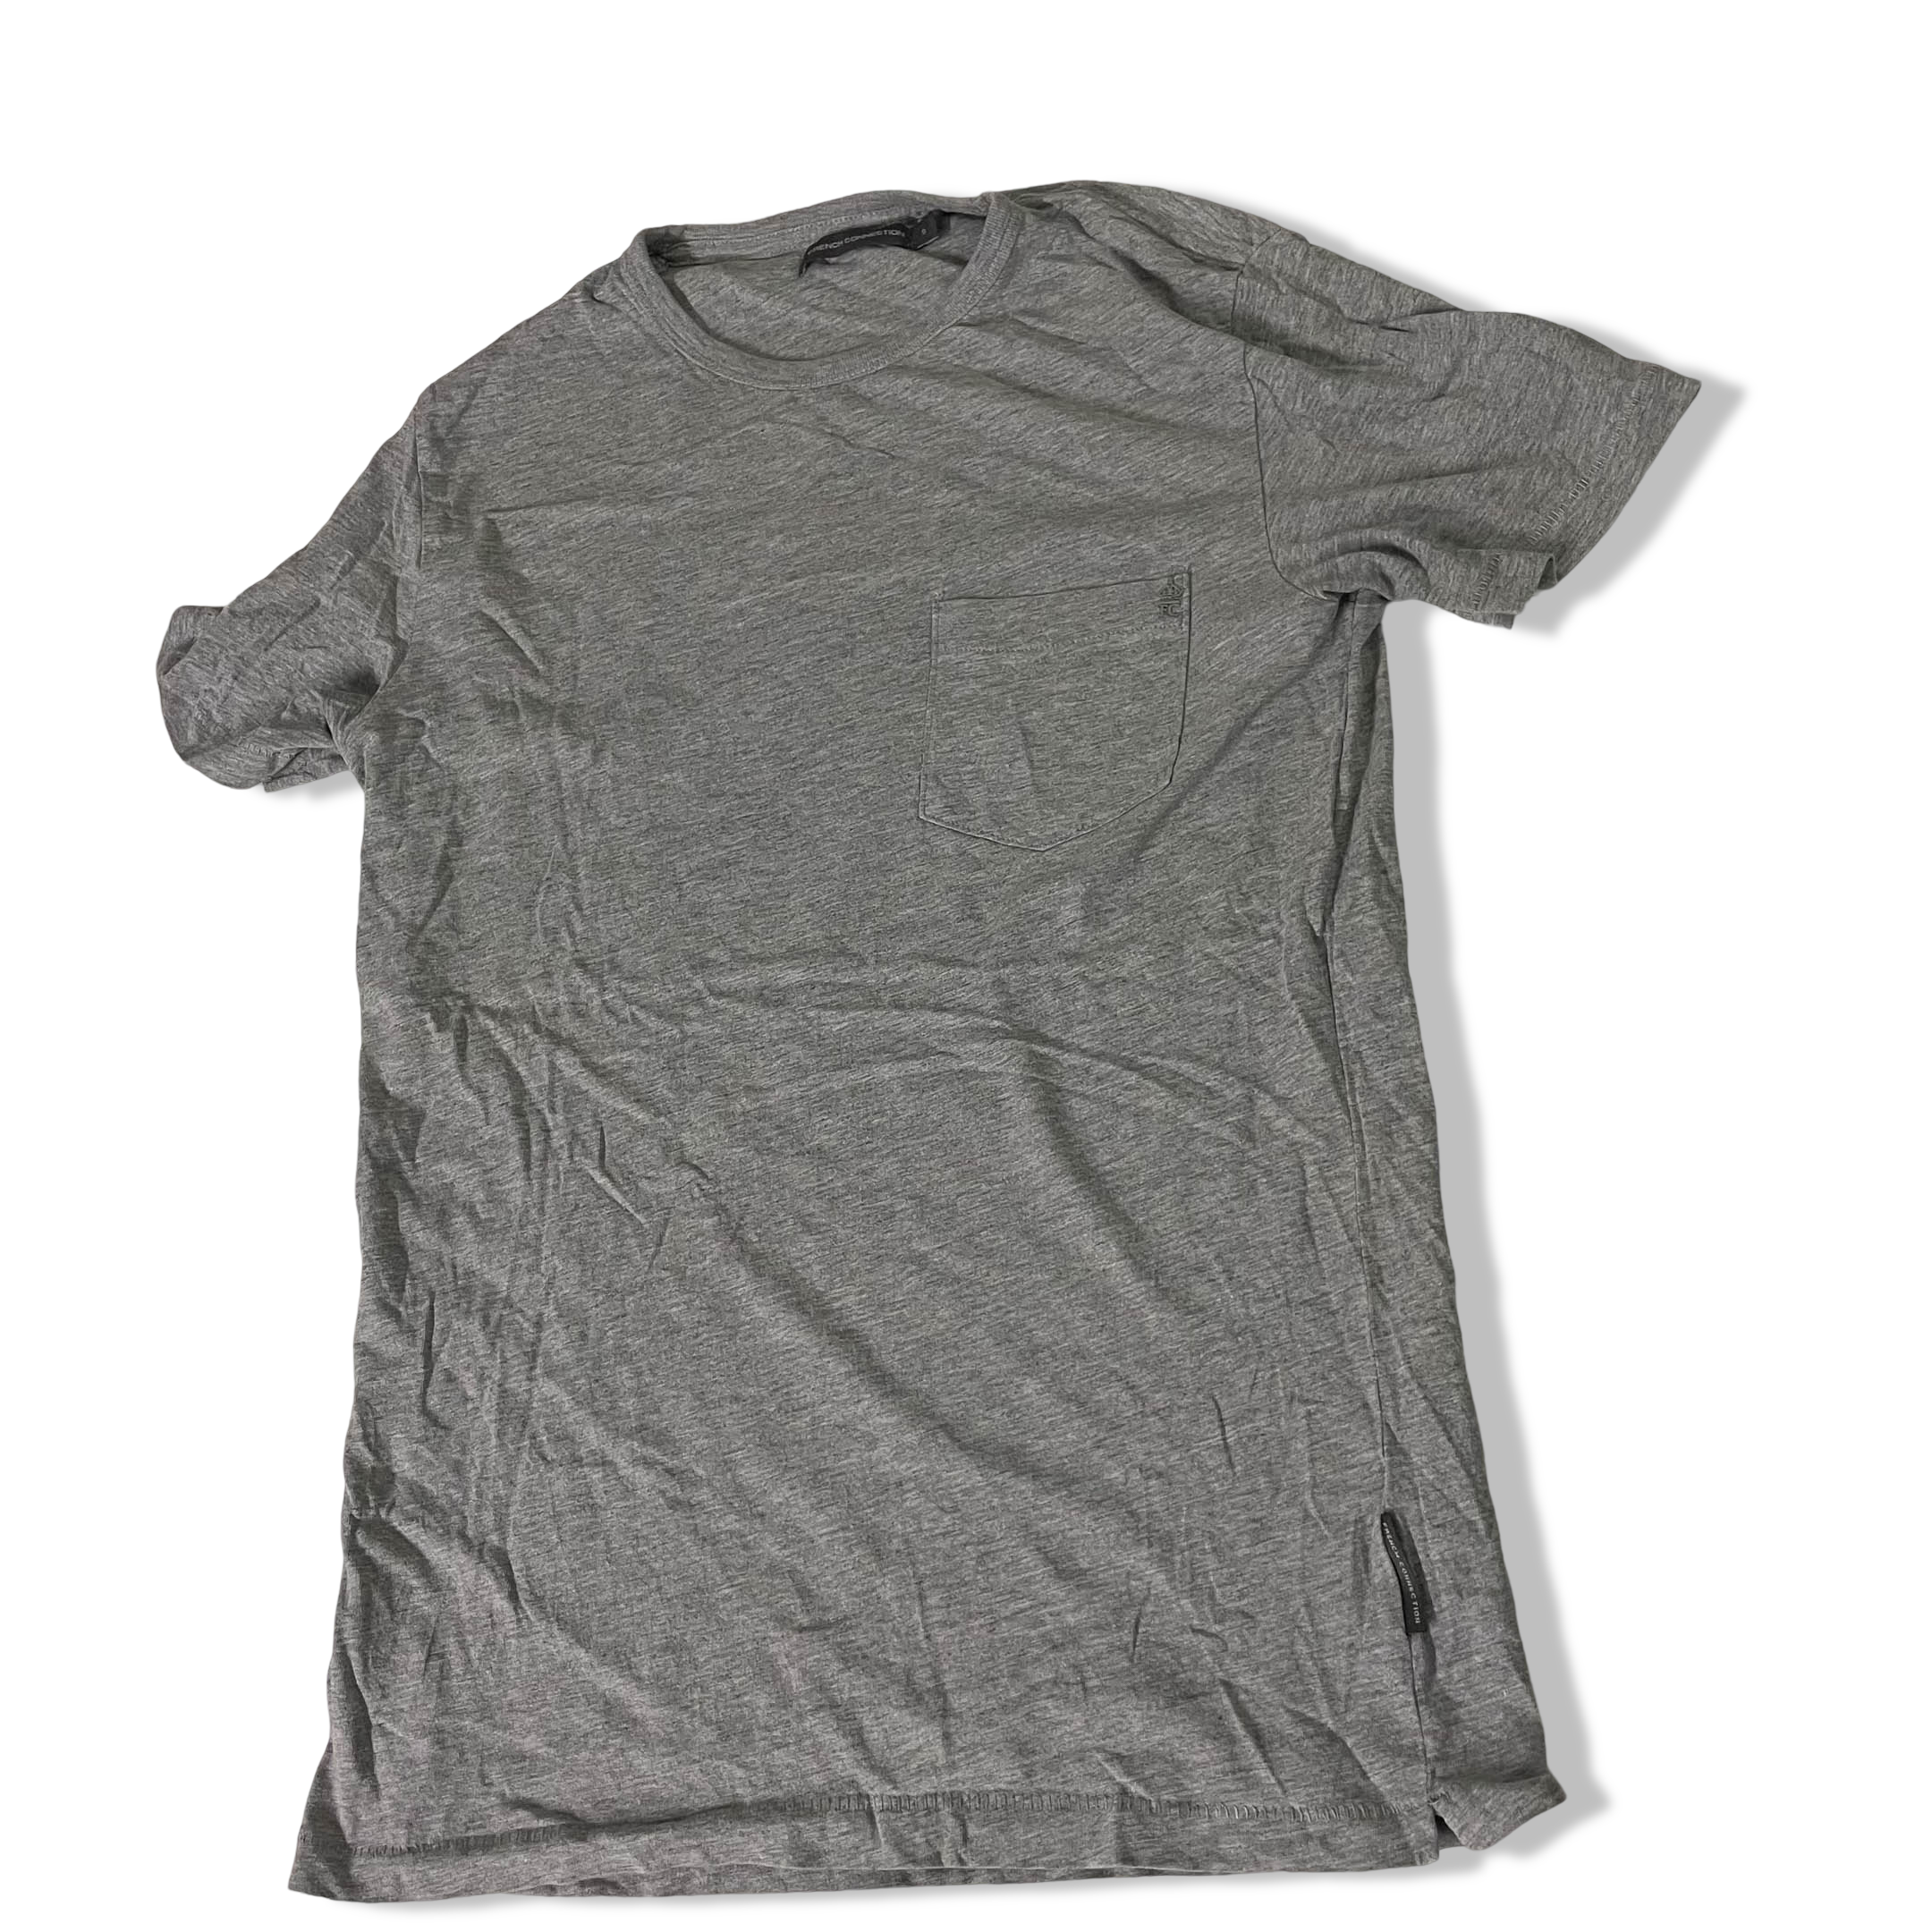 Vintage Men's French Connection grey small tees with front pocket| S| SKU 3678